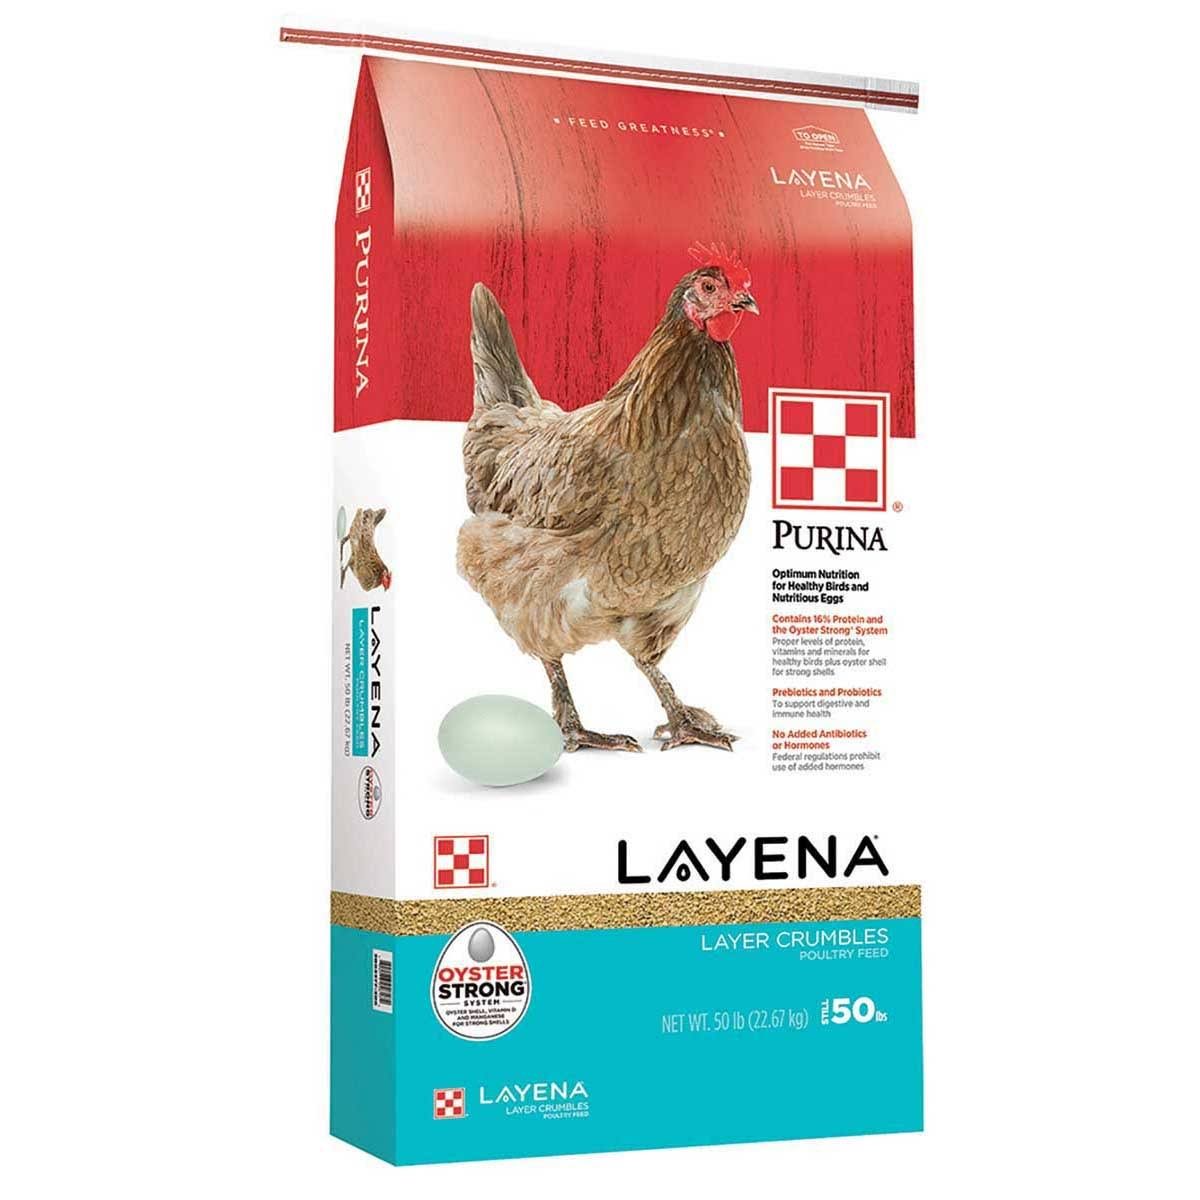 Purina Premium Poultry Feed Layena Crumbles